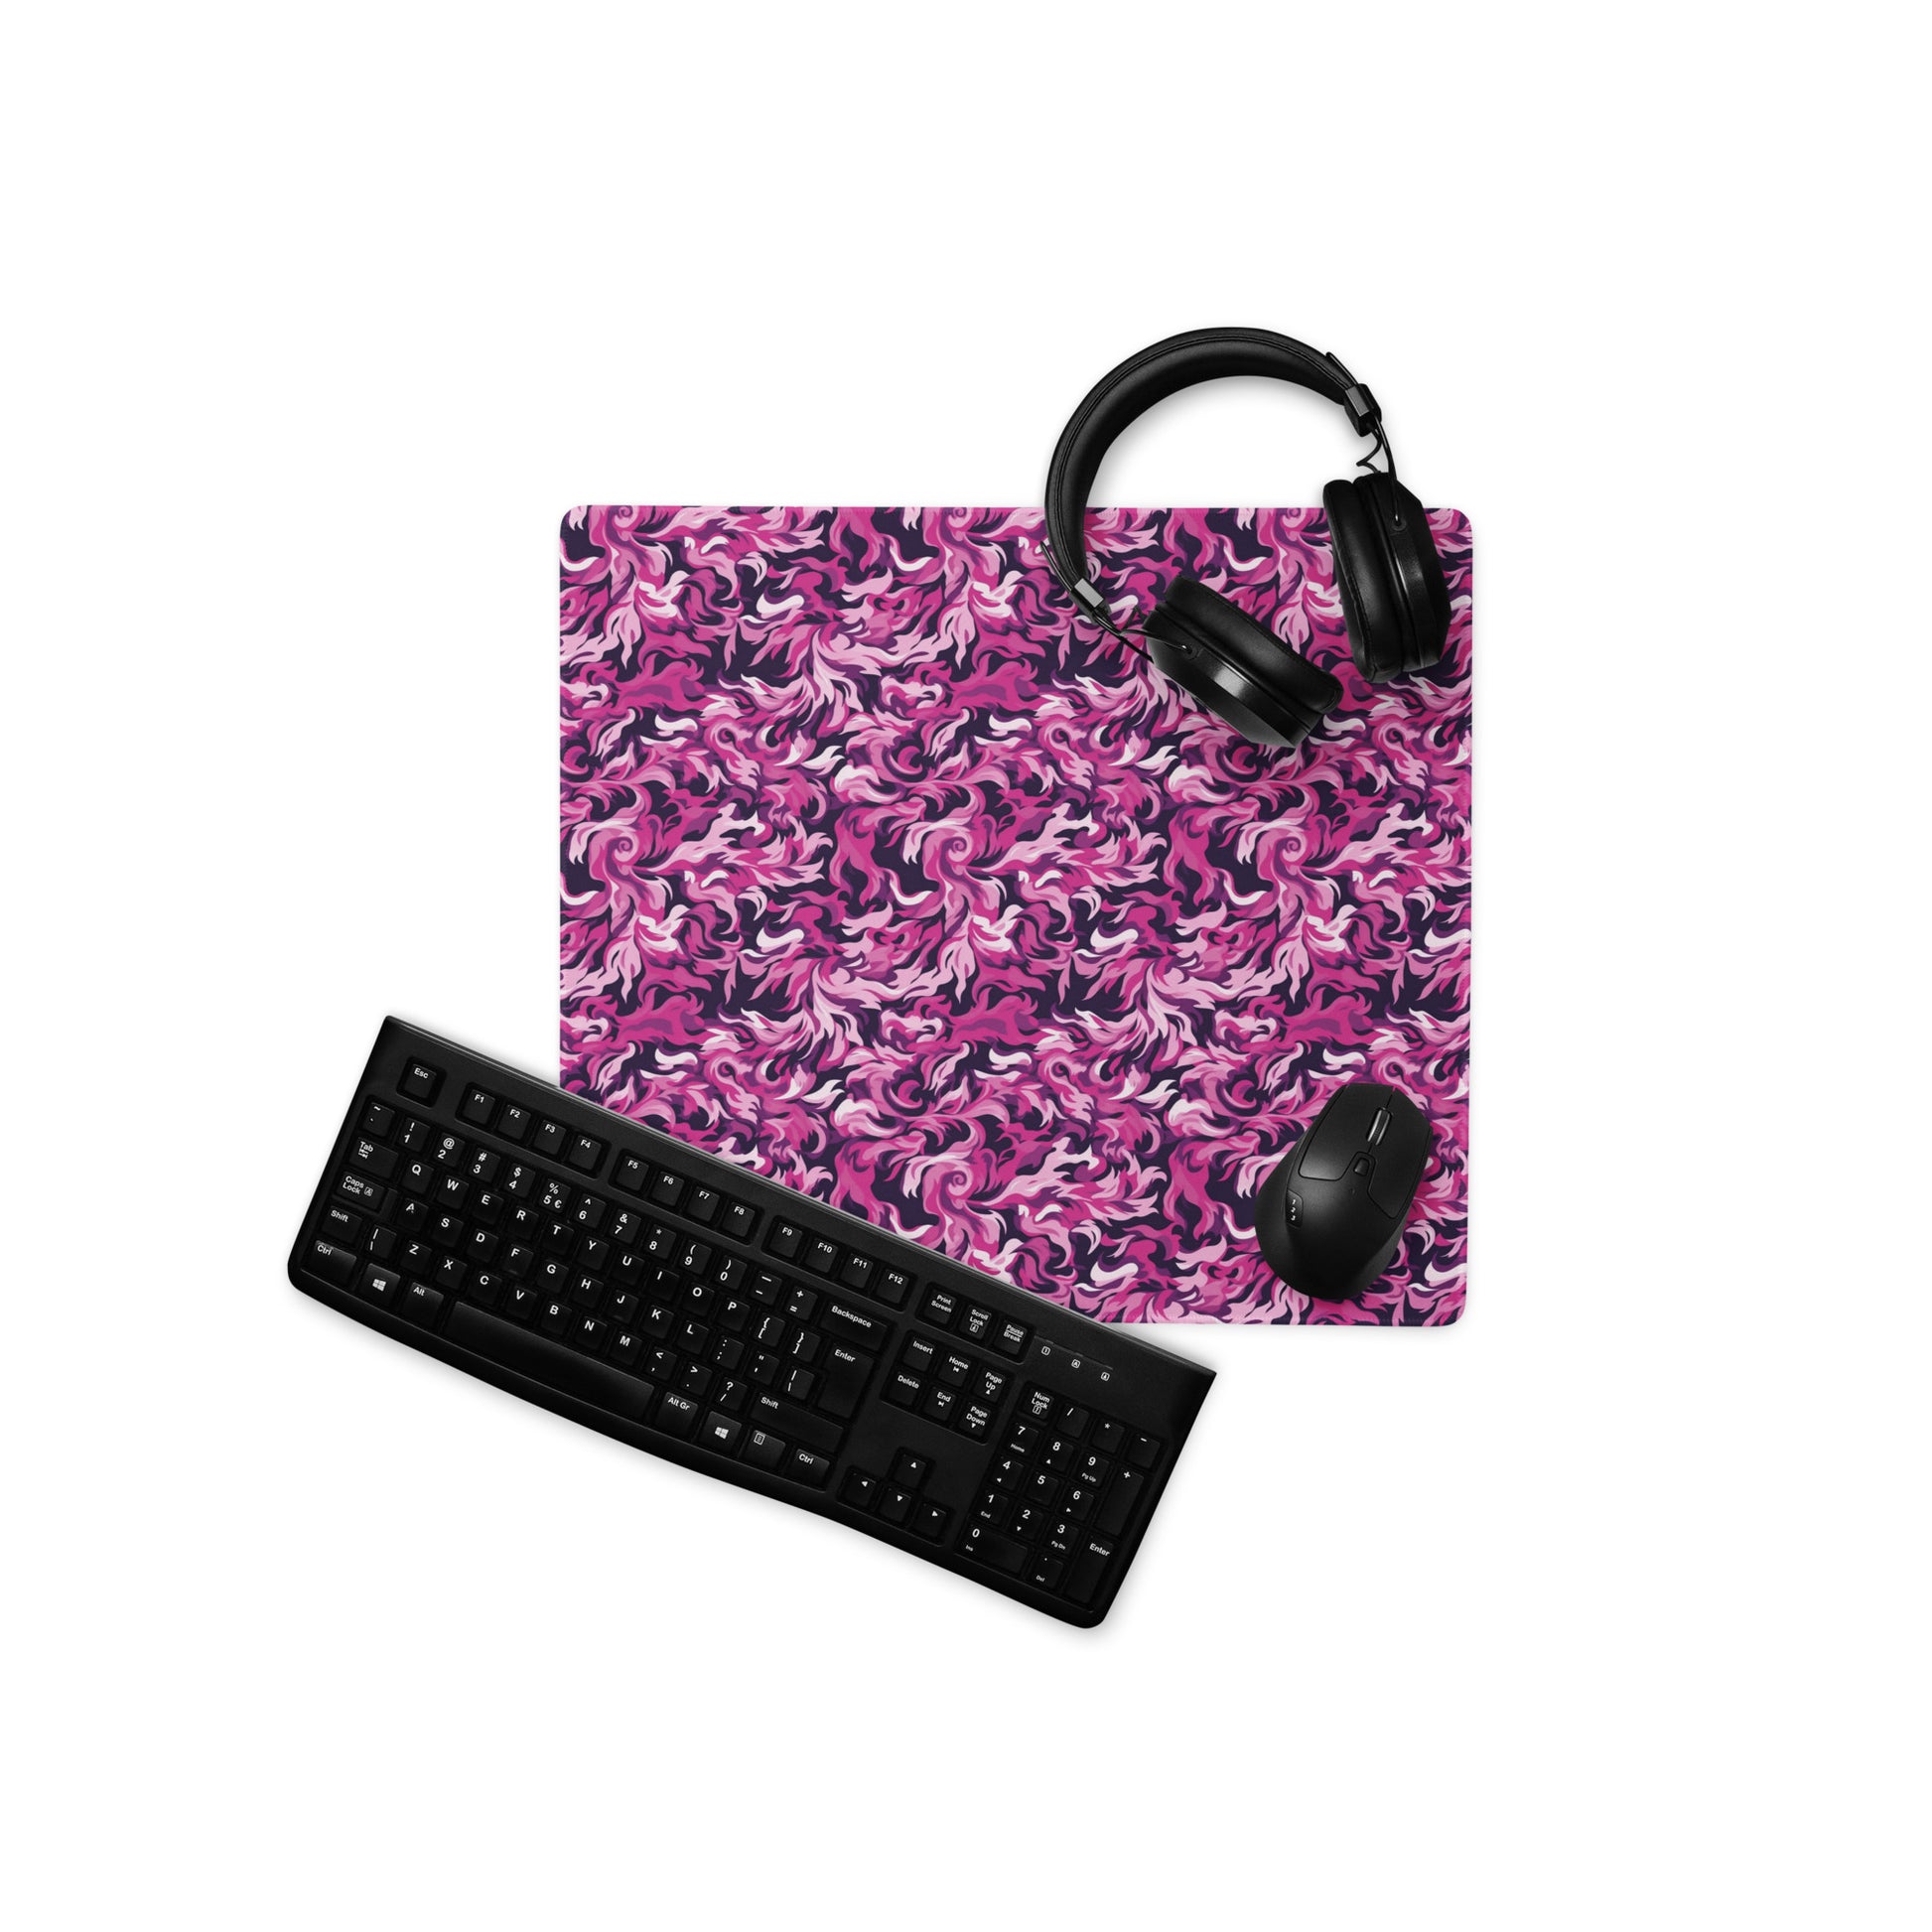 A 18" x 16" desk pad with a pink and magenta camo pattern. With a keyboard, mouse, and headphones sitting on it.